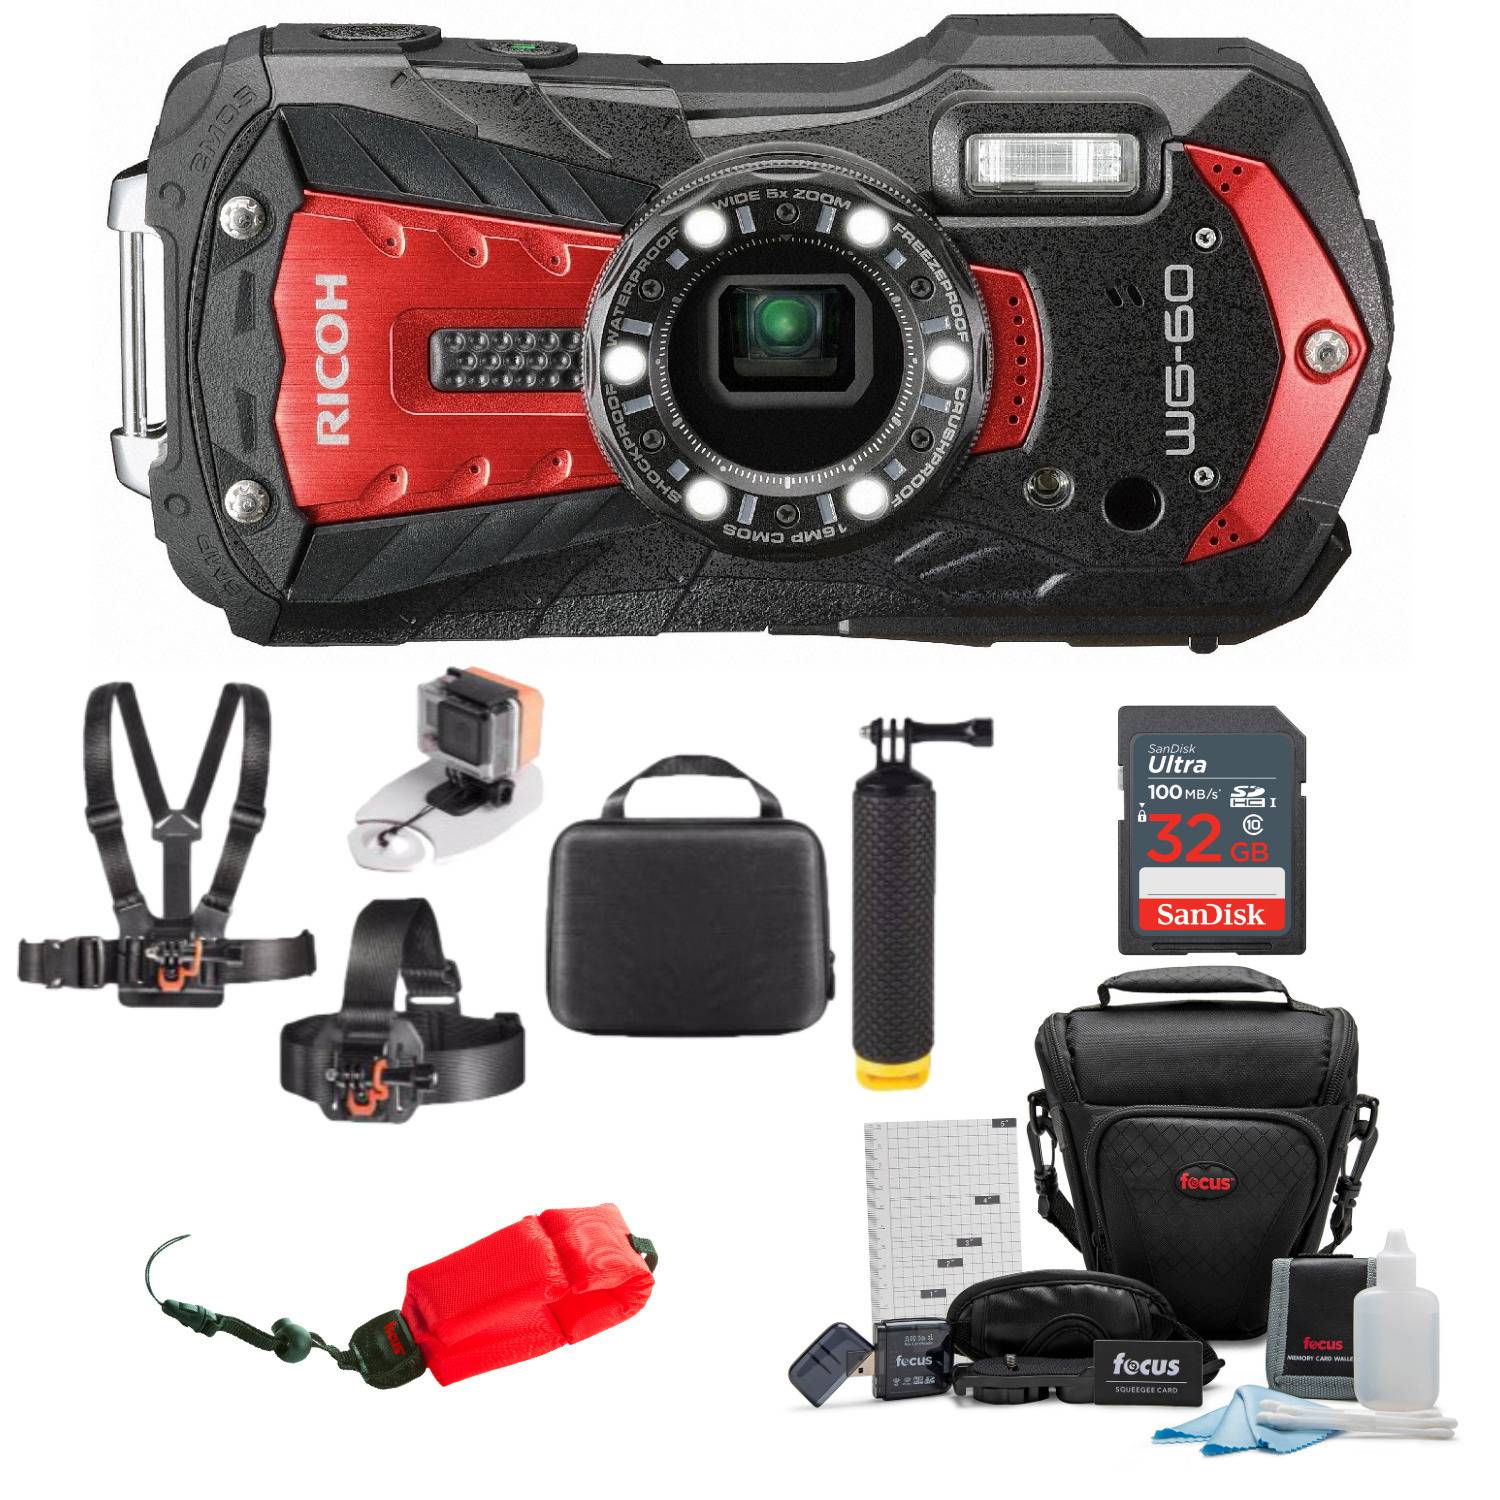 Ricoh WG-60 Digital Camera (Red) with 32GB SD Card, Case and Adventure On Water Action Bundle